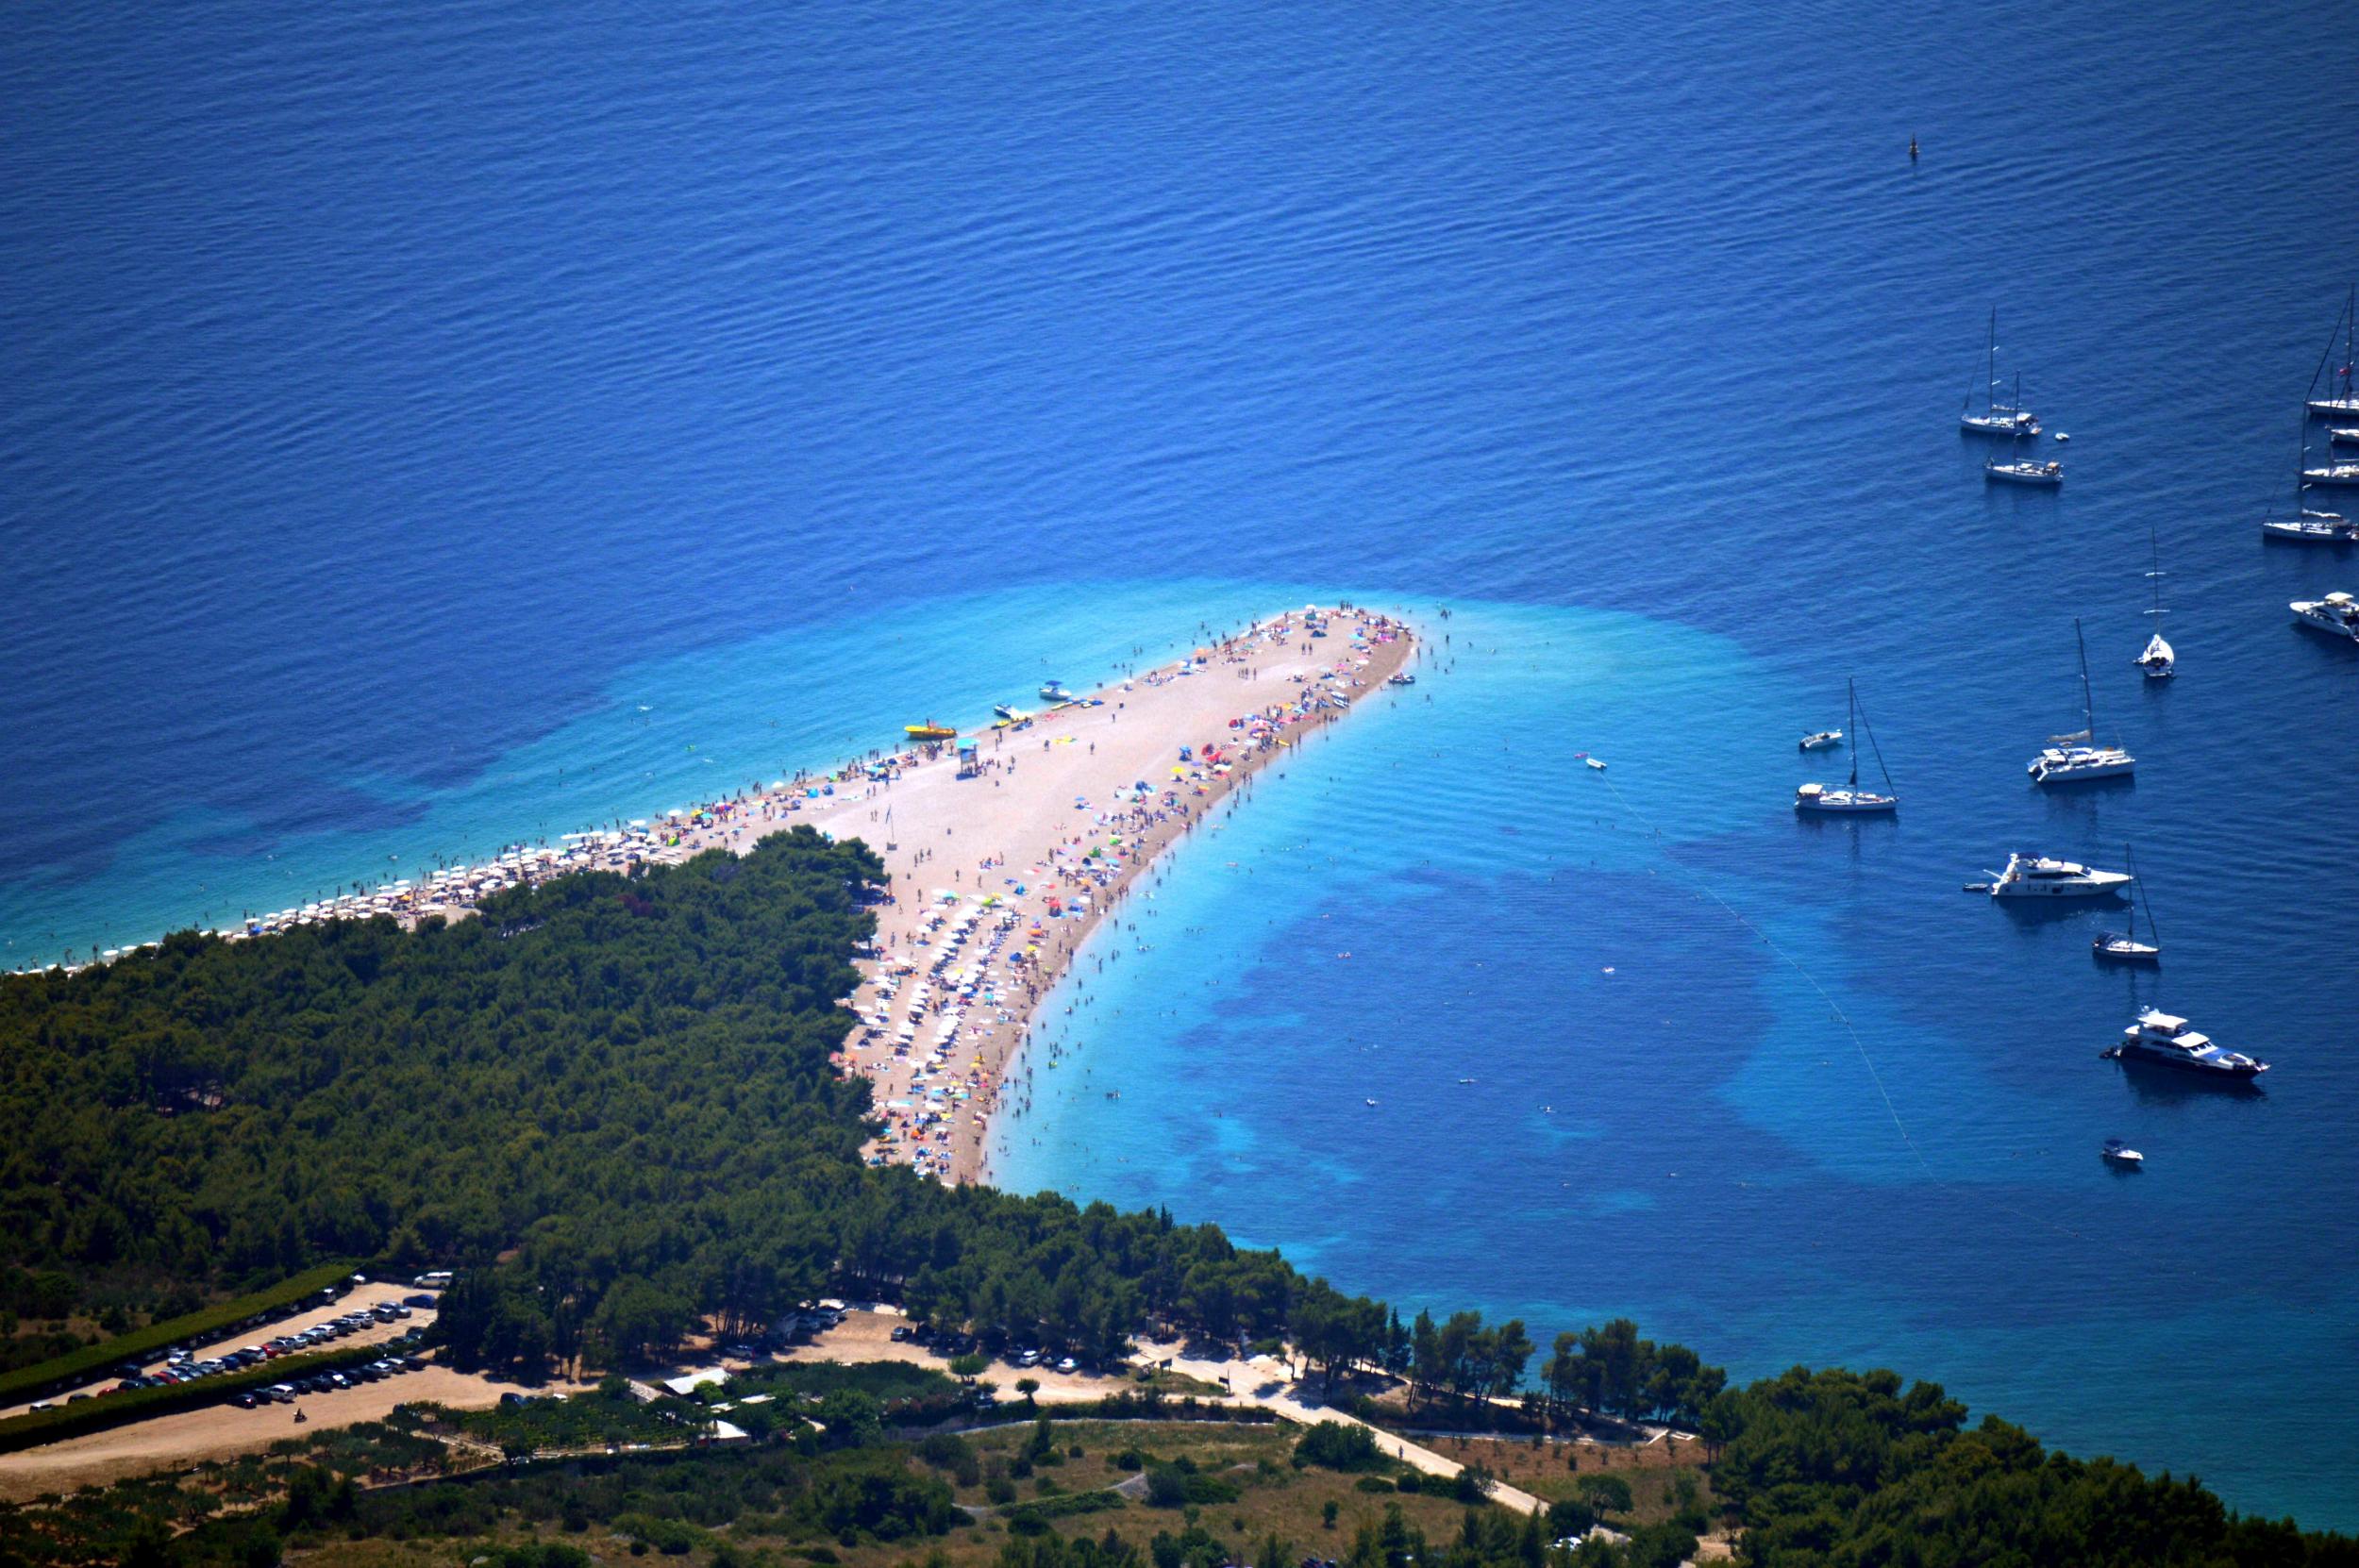 Croatia Naturist Beach Sex - How to pick your perfect Croatian island | The Independent | The Independent